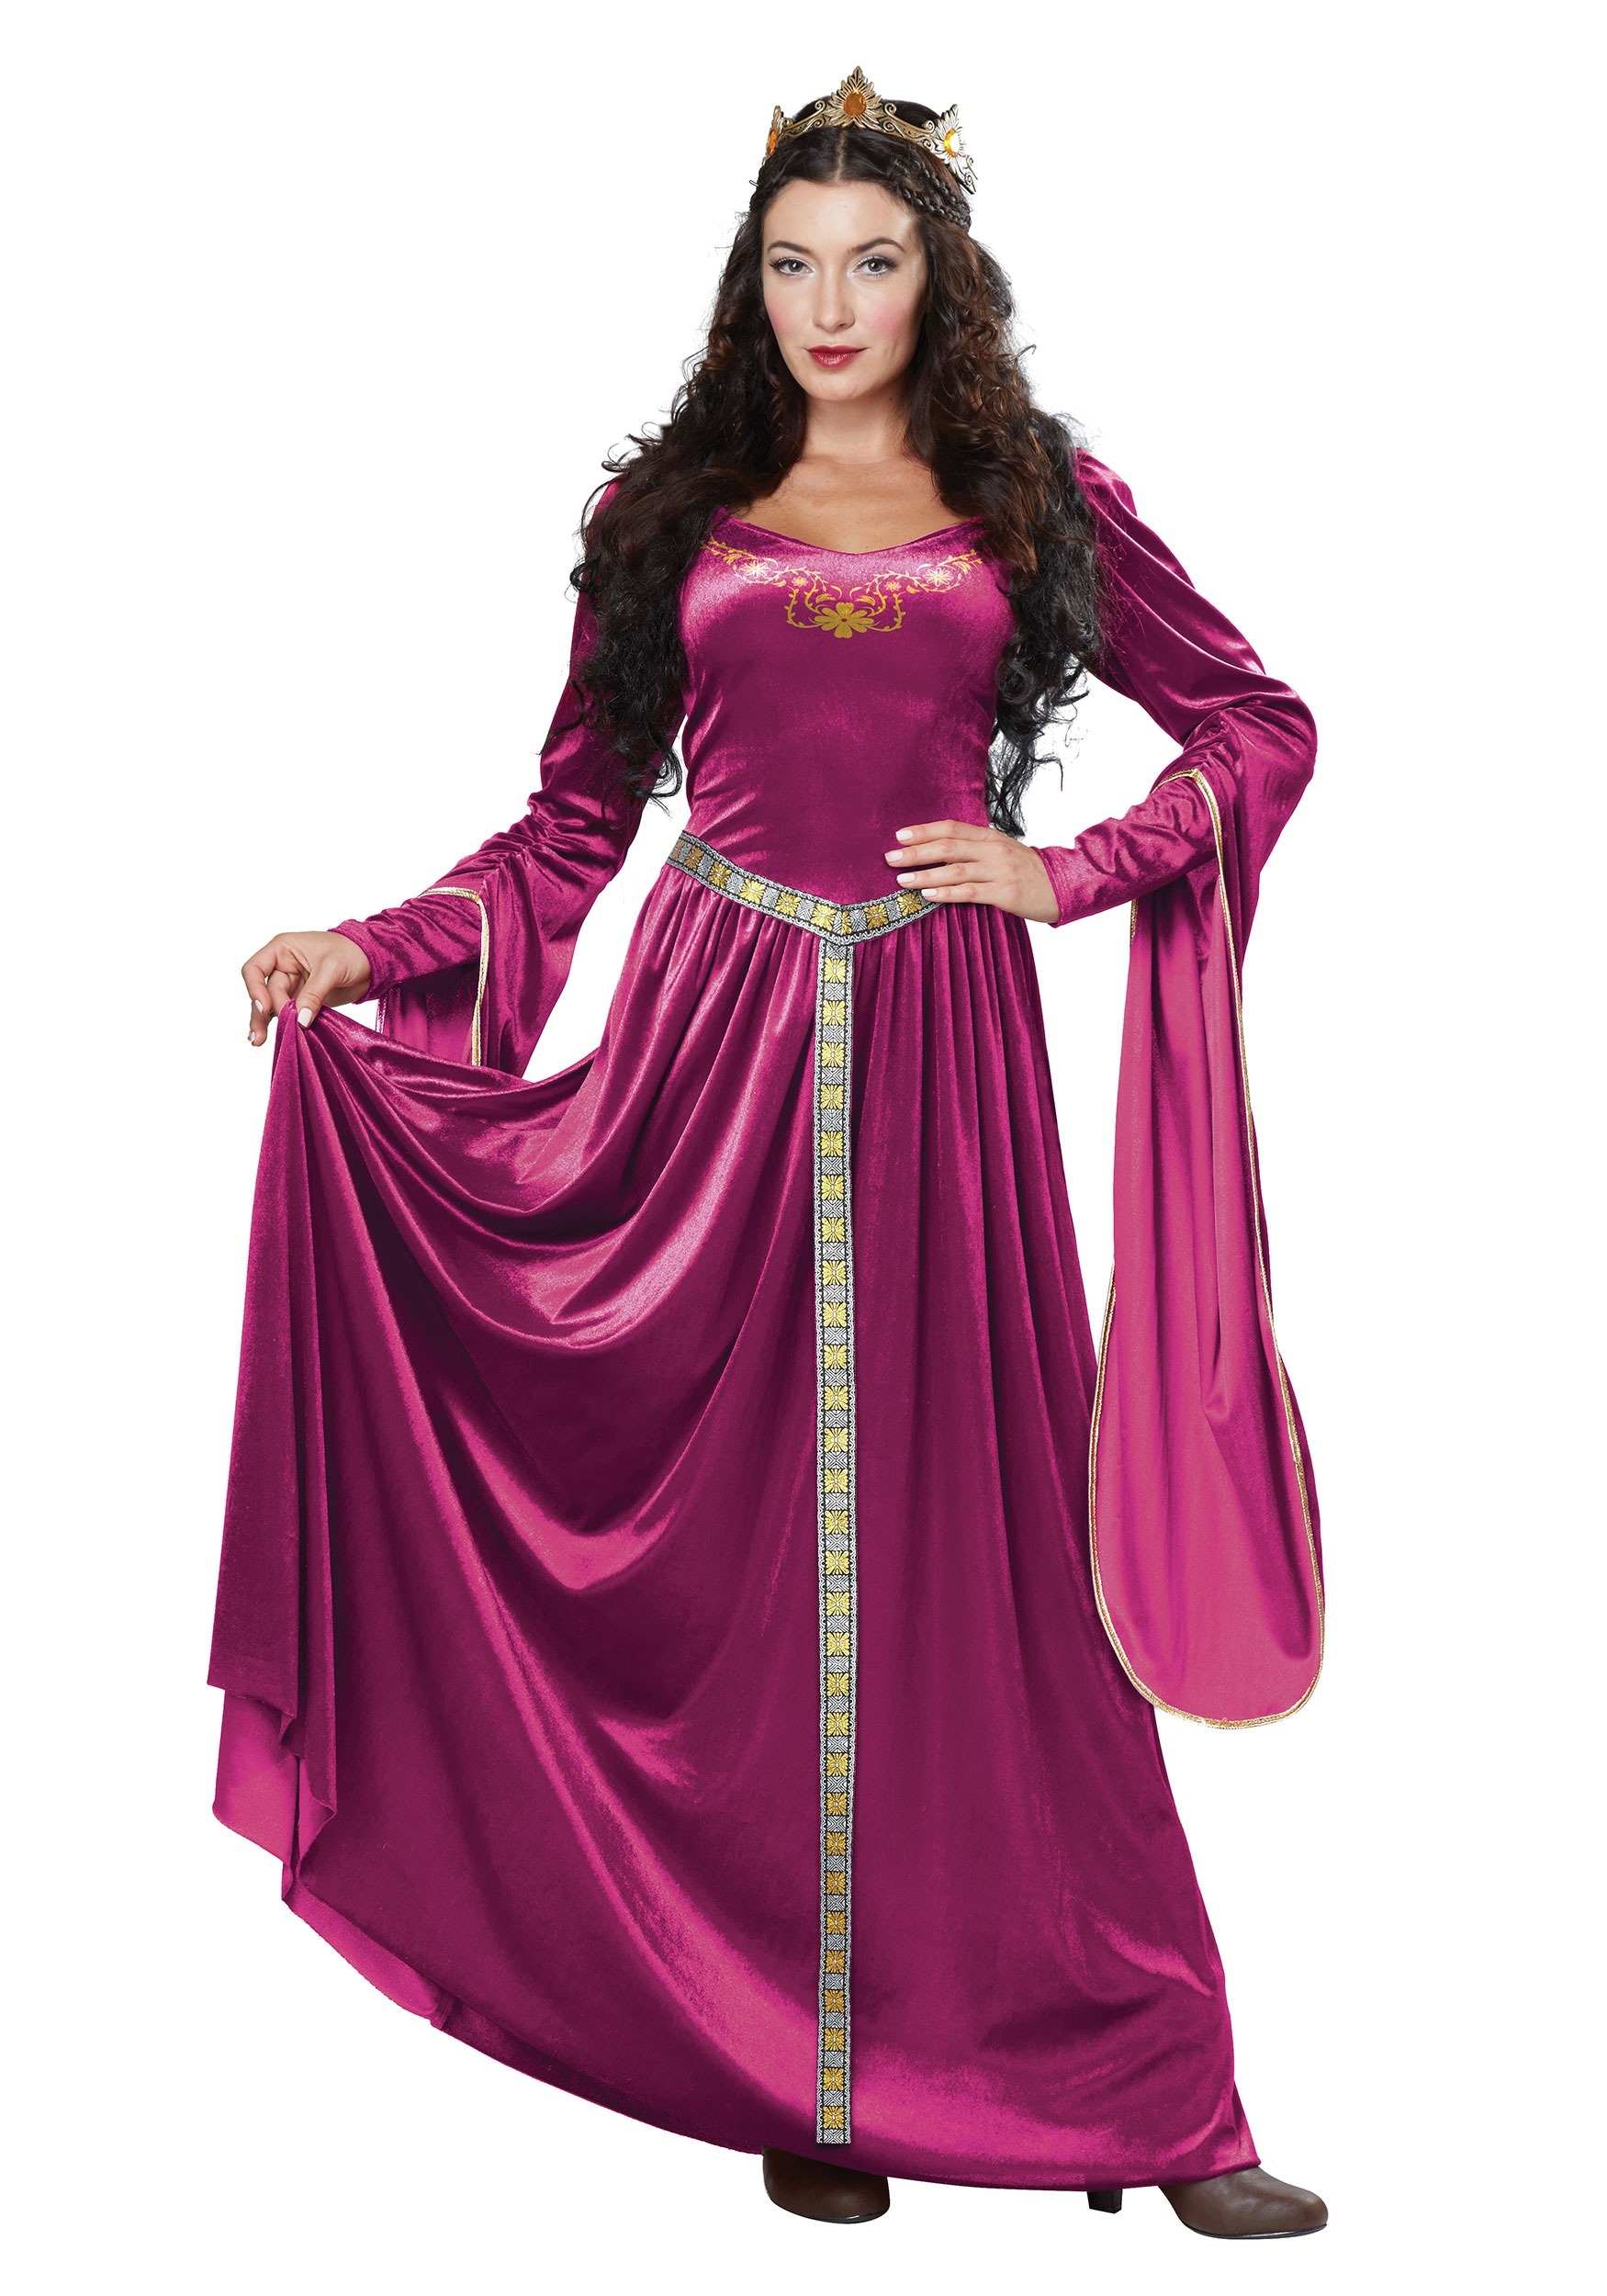 Lady Guinevere Costume Dress for Women